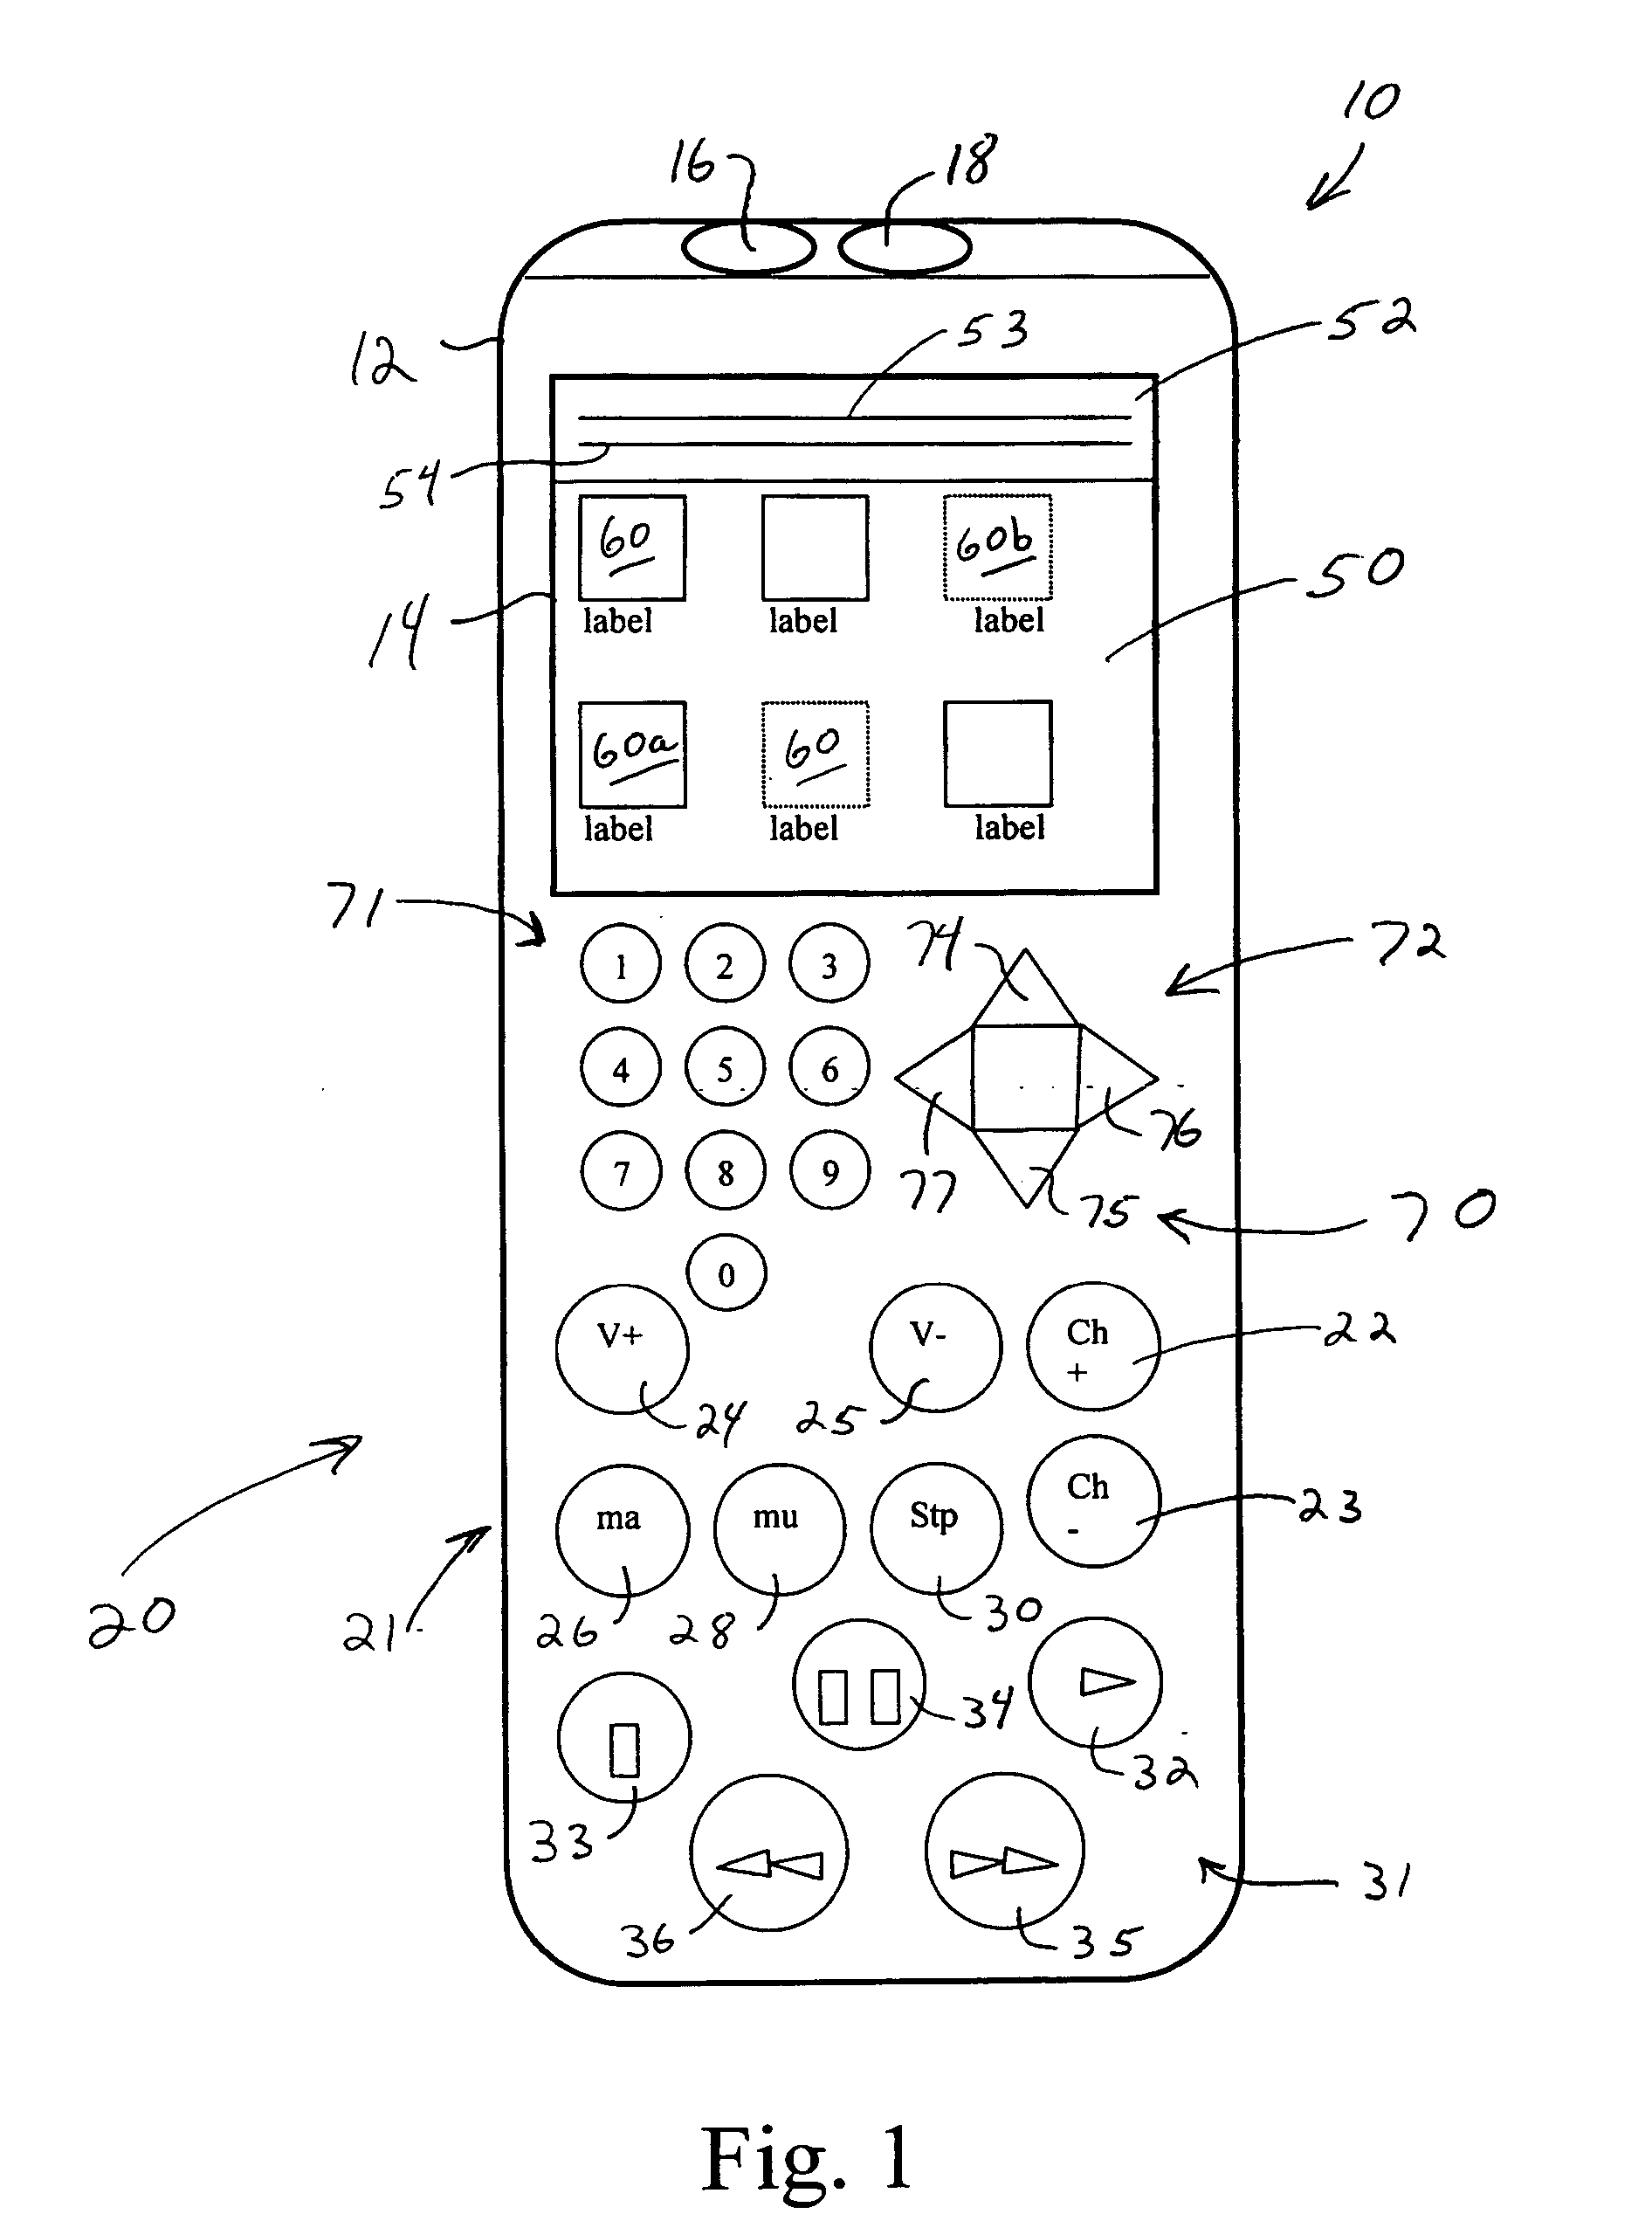 Remote control with programmable button labeling and labeling display upon button actuation